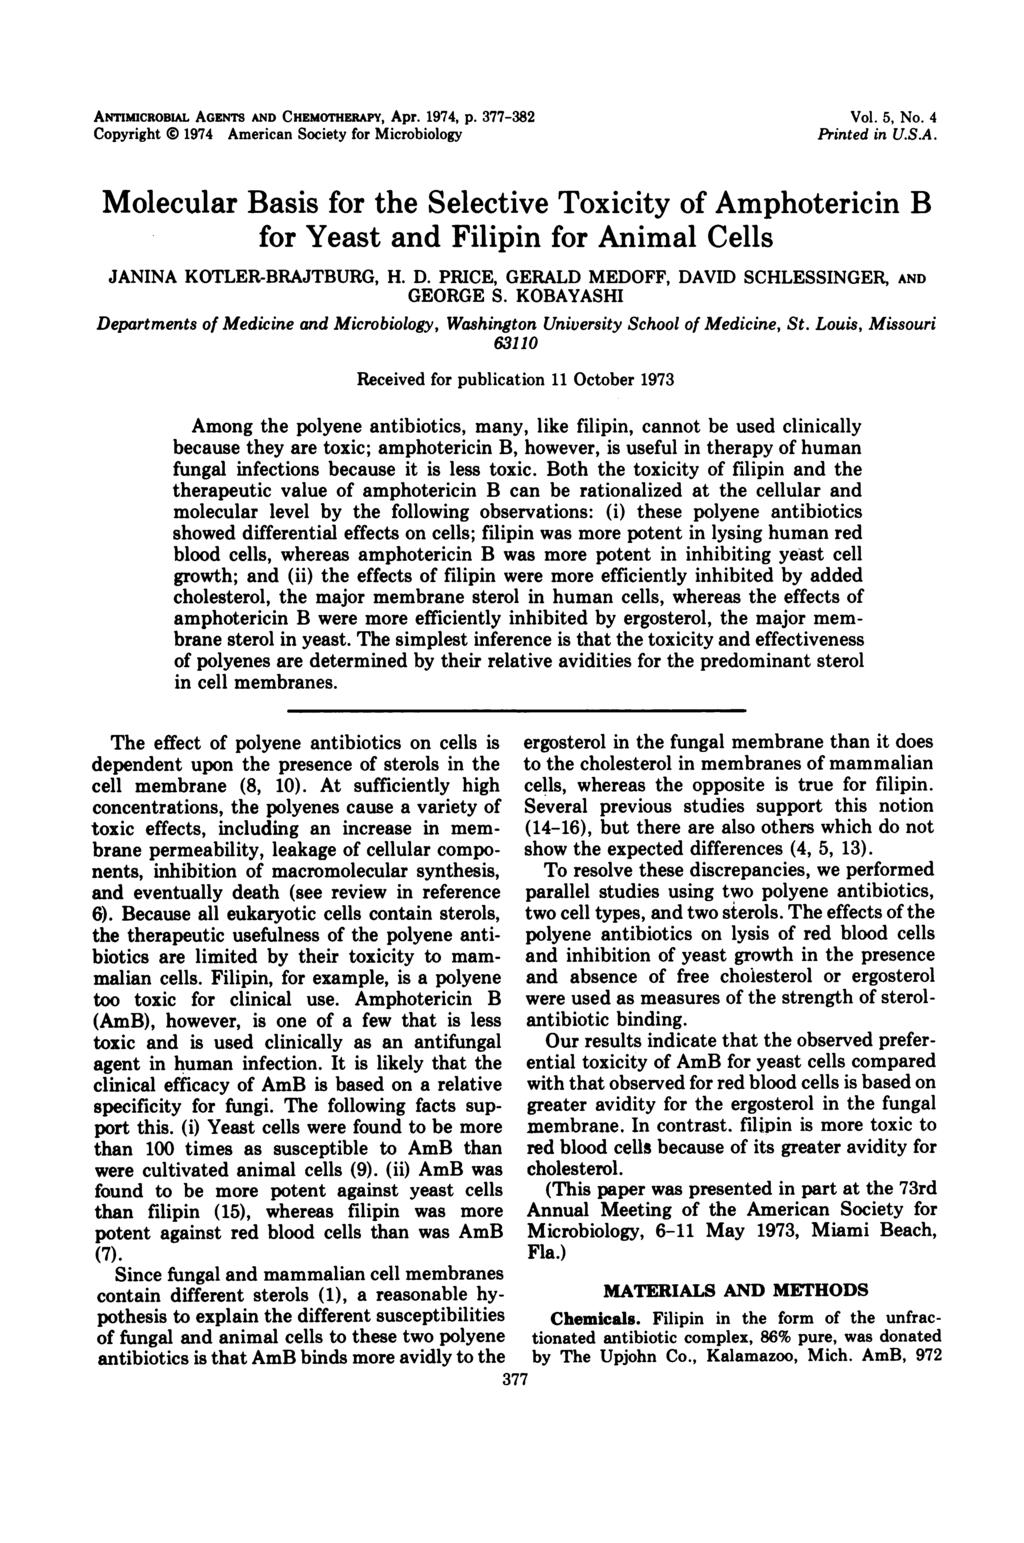 ANTIMICROBIAL AGENTS AND CHEMOTHERAPY, Apr. 1974, p. 377-382 Copyright 0 1974 American Society for Microbiology Vol. 5, No. 4 Printed in U.S.A. Molecular Basis for the Selective Toxicity of Amphotericin B for Yeast and Filipin for Animal Cells JANINA KOTLER-BRAJTBURG, H.